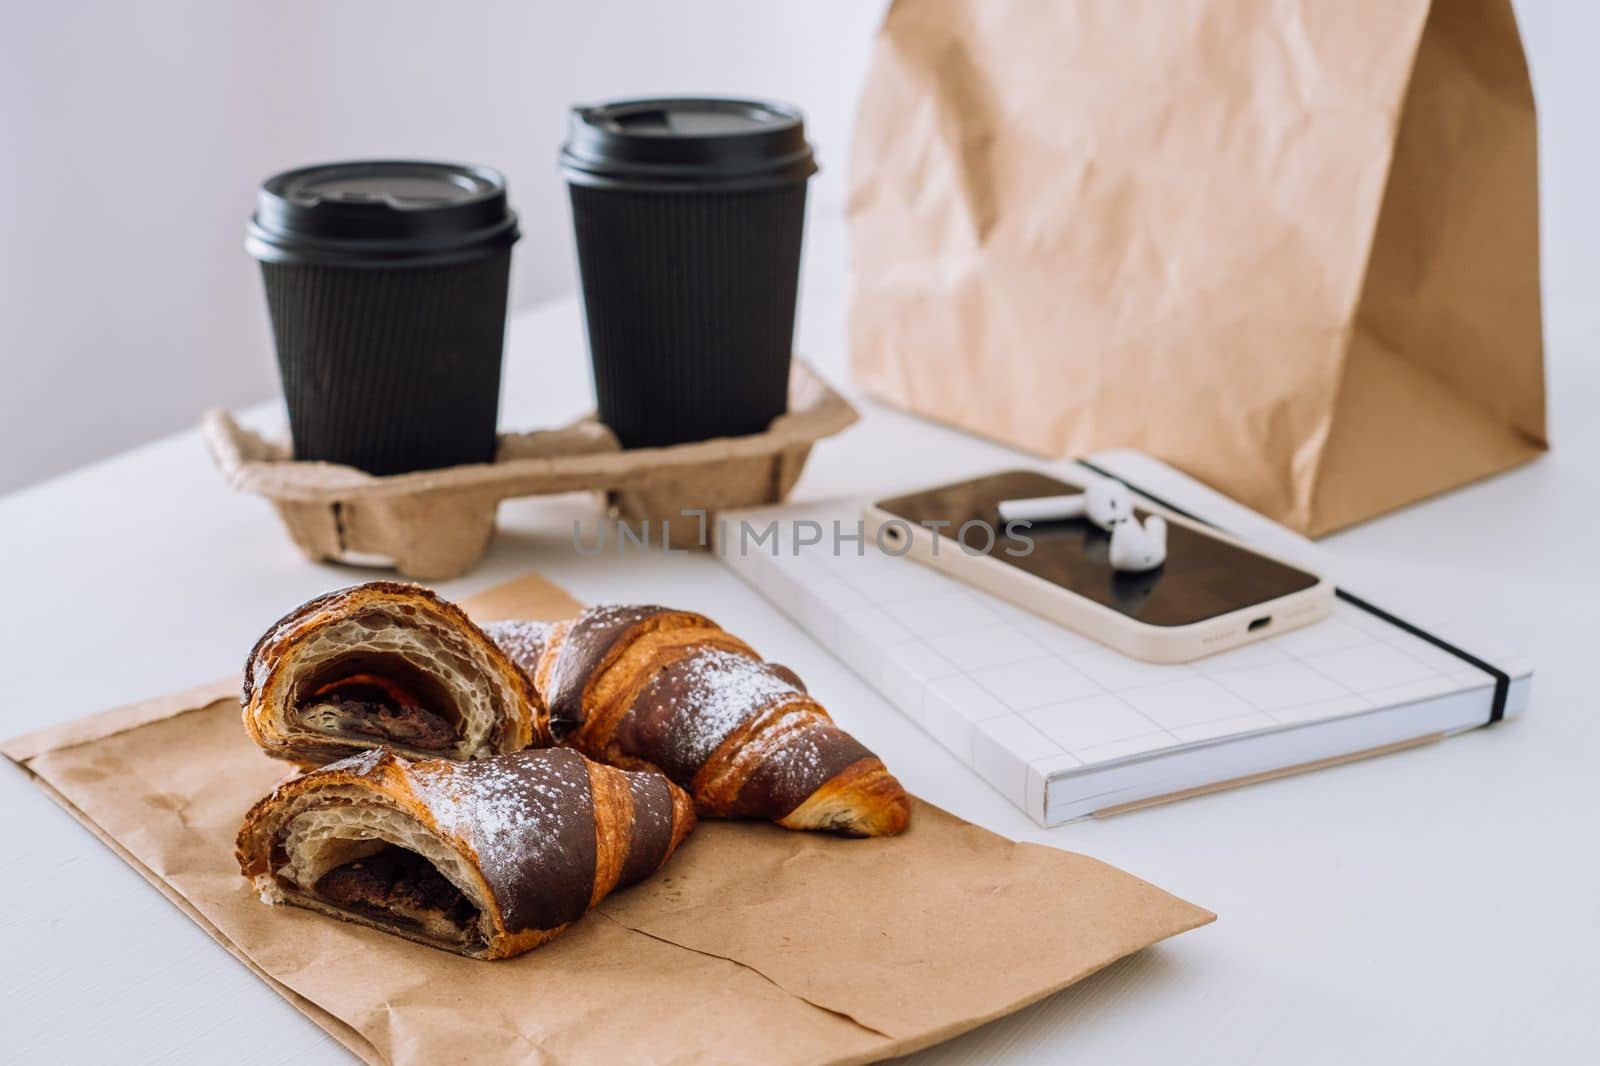 Chocolate croissants with cups of coffee and notepad with smartphone and earphones on white table, food delivery concept